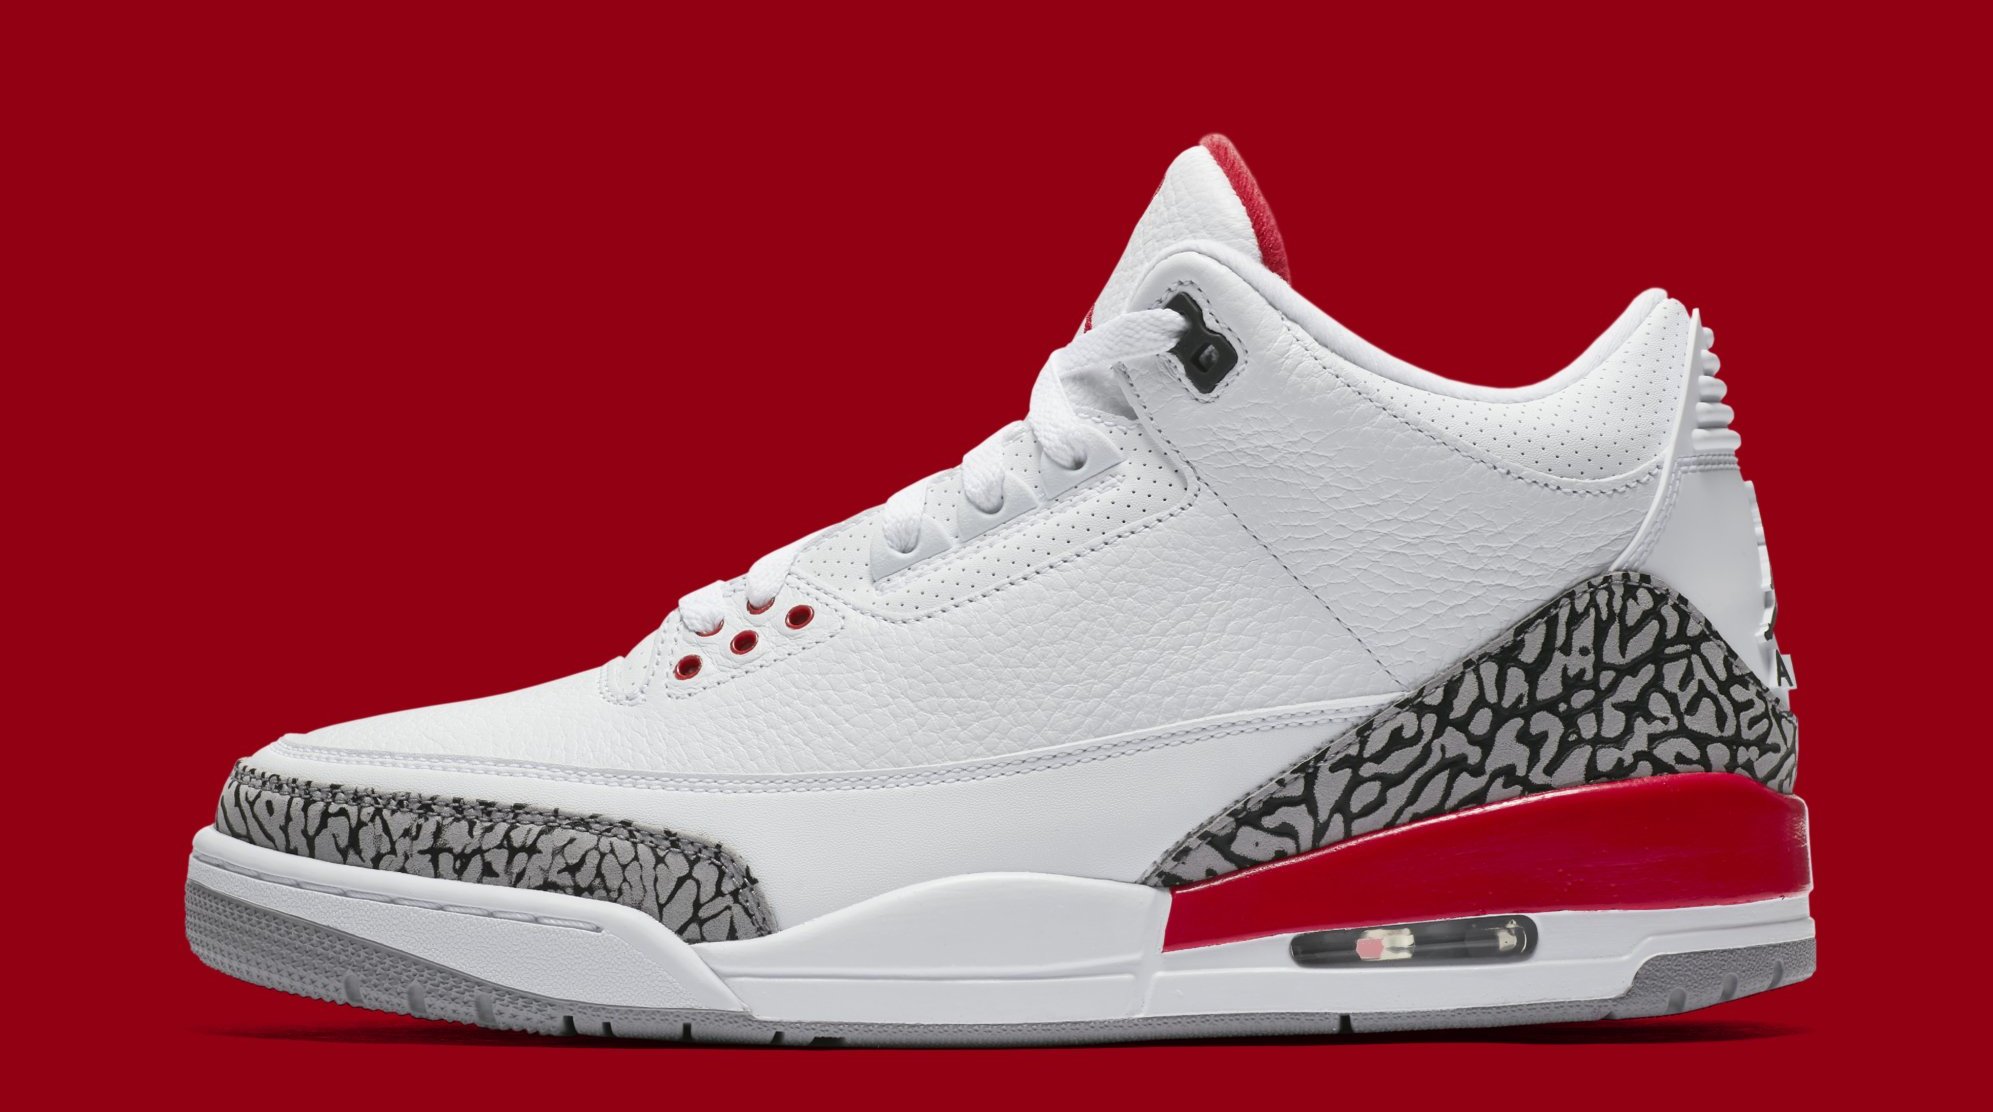 jordan 3s that just came out